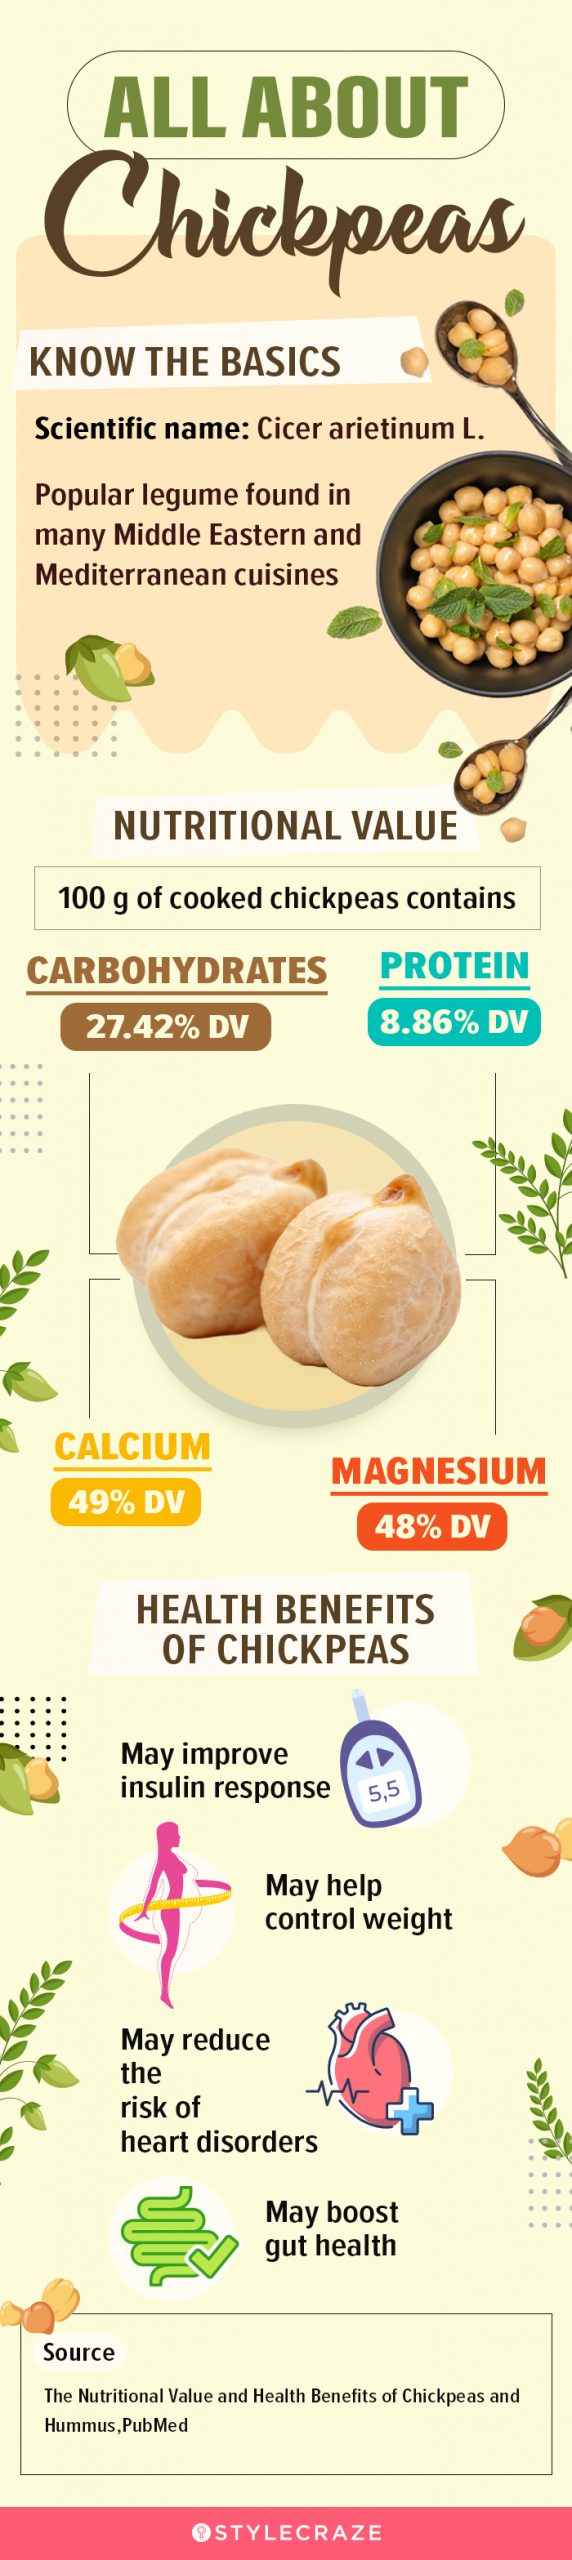 all about chickpeas [infographic]